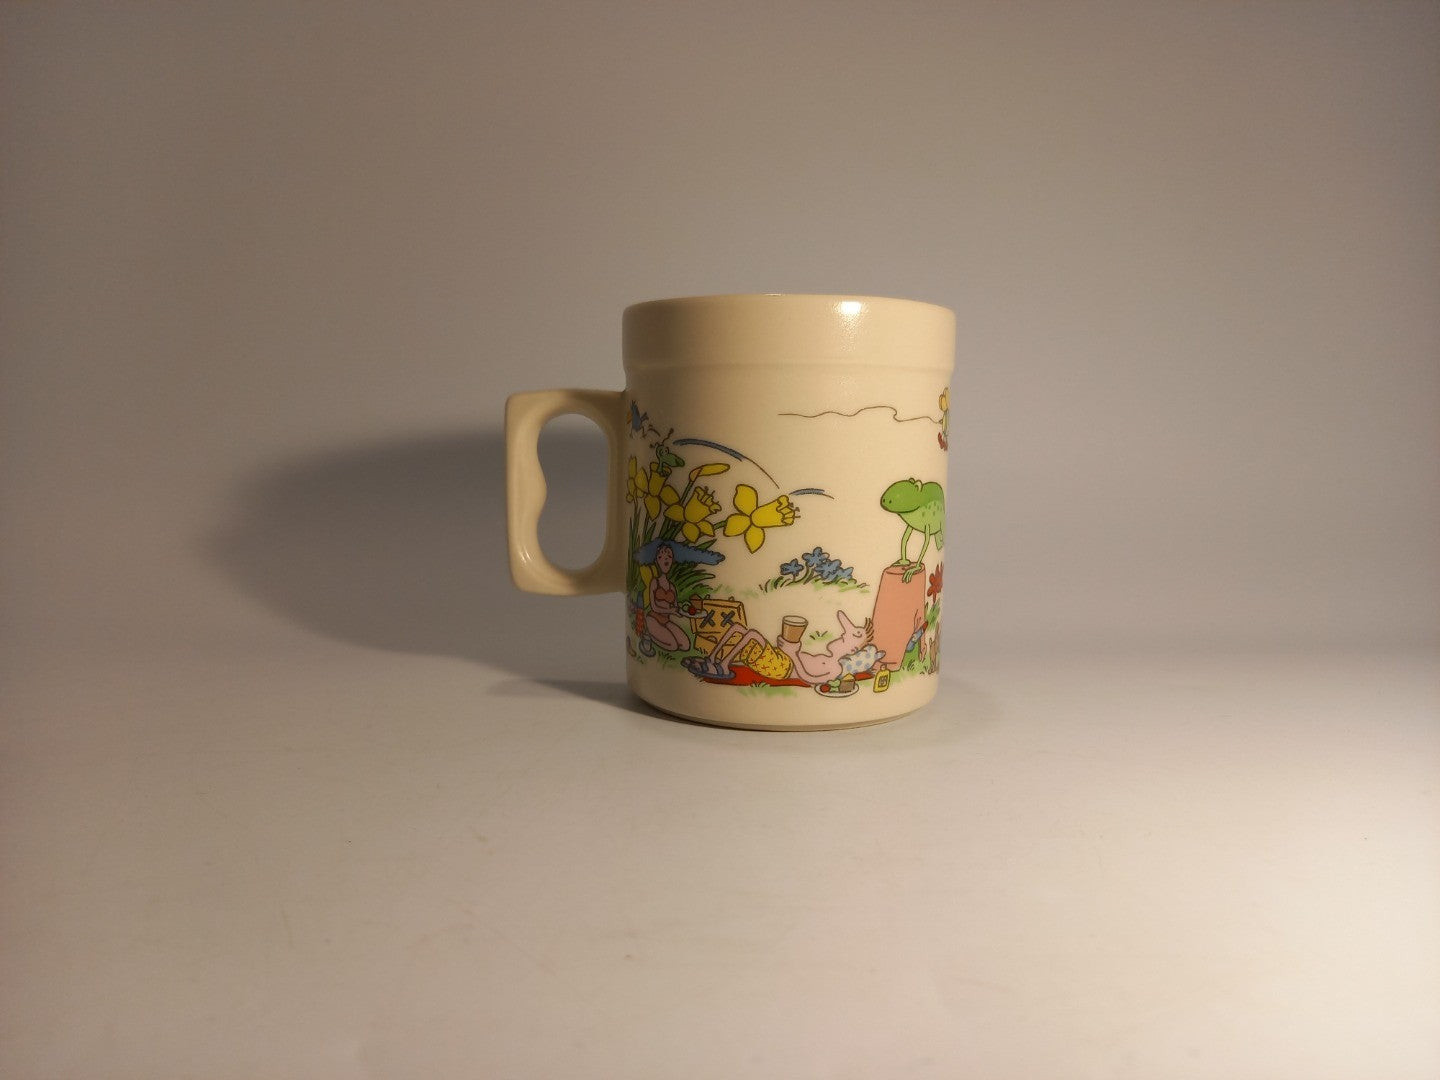 Hornsea Mug What-a-Mess, Vintage / Retro Graphic Print Cup